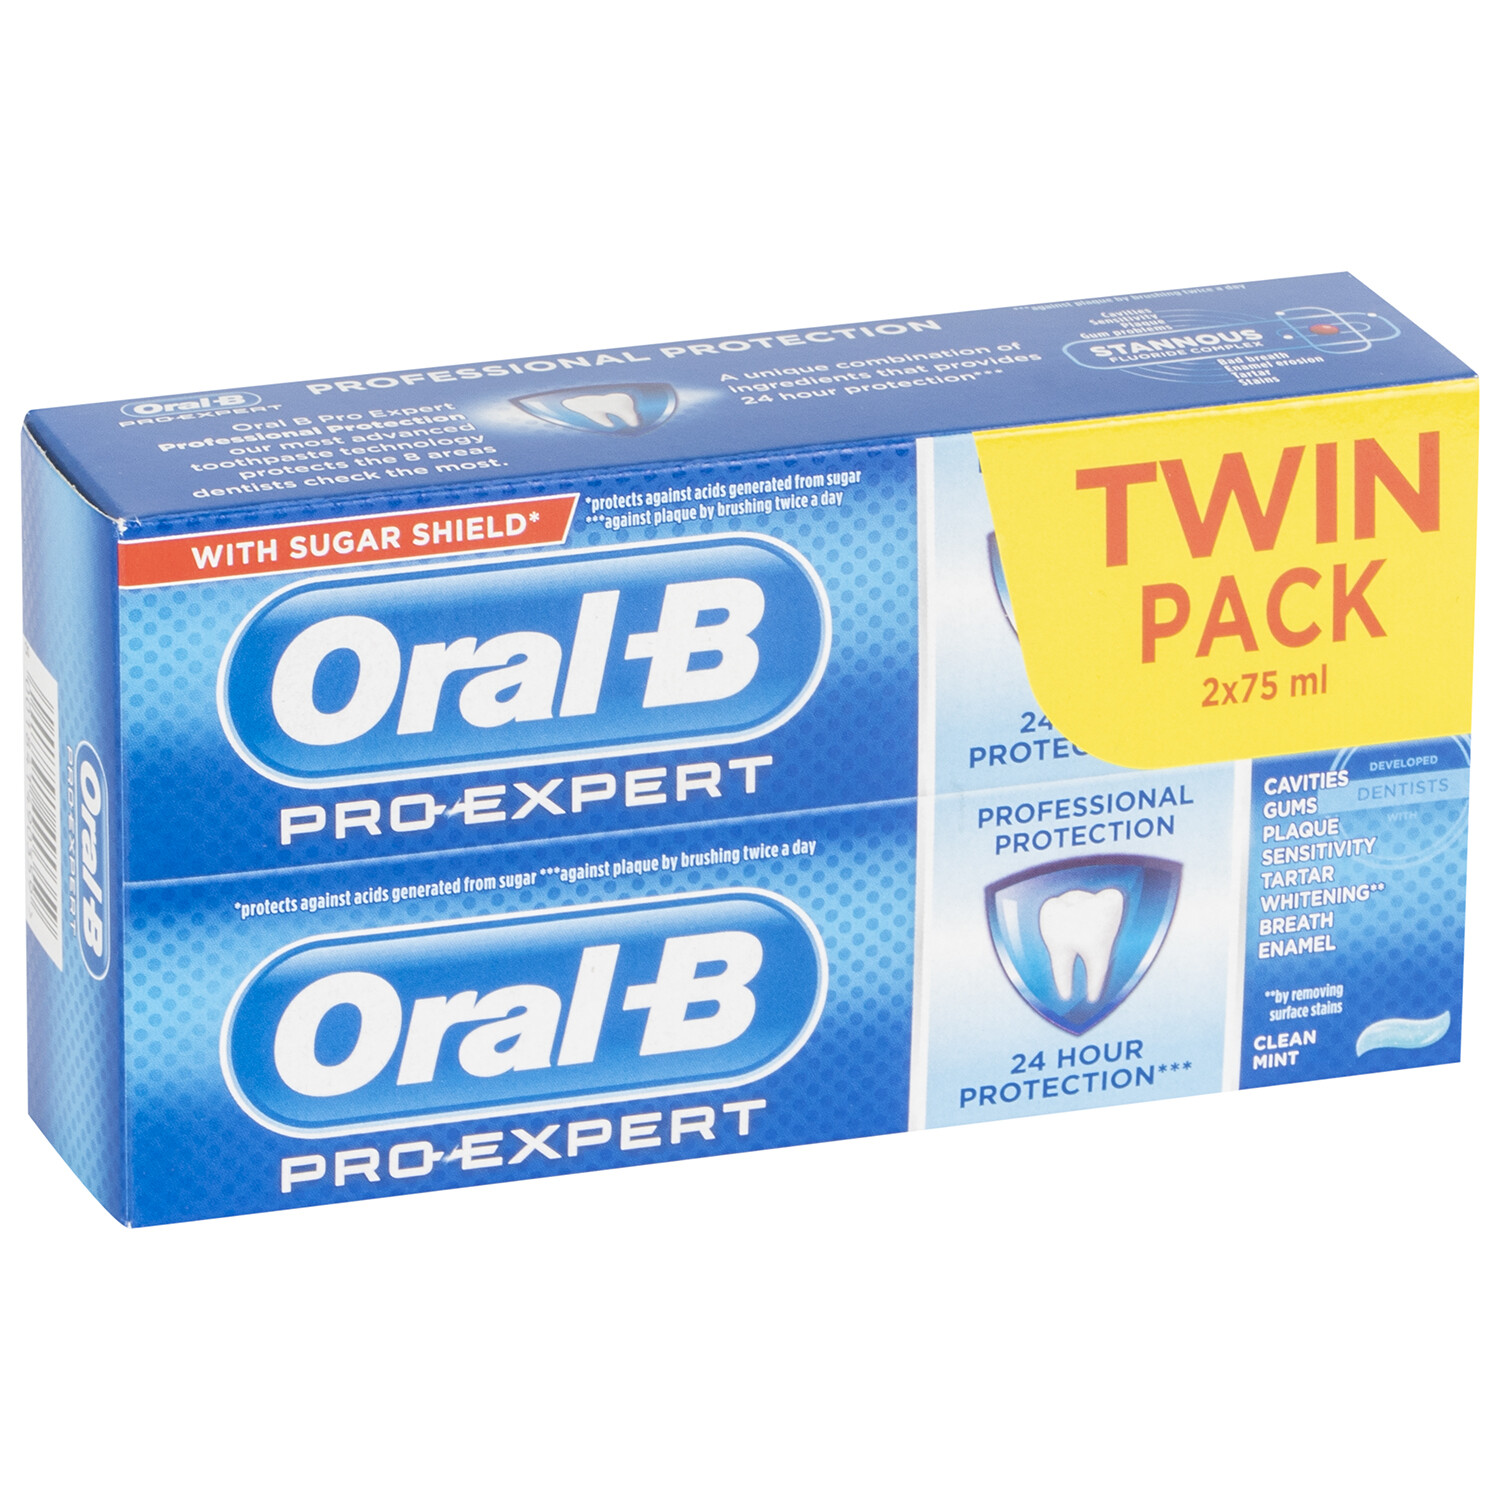 Pack of 2 Oral B Pro-Expert Professional Protection 75ml Toothpaste Image